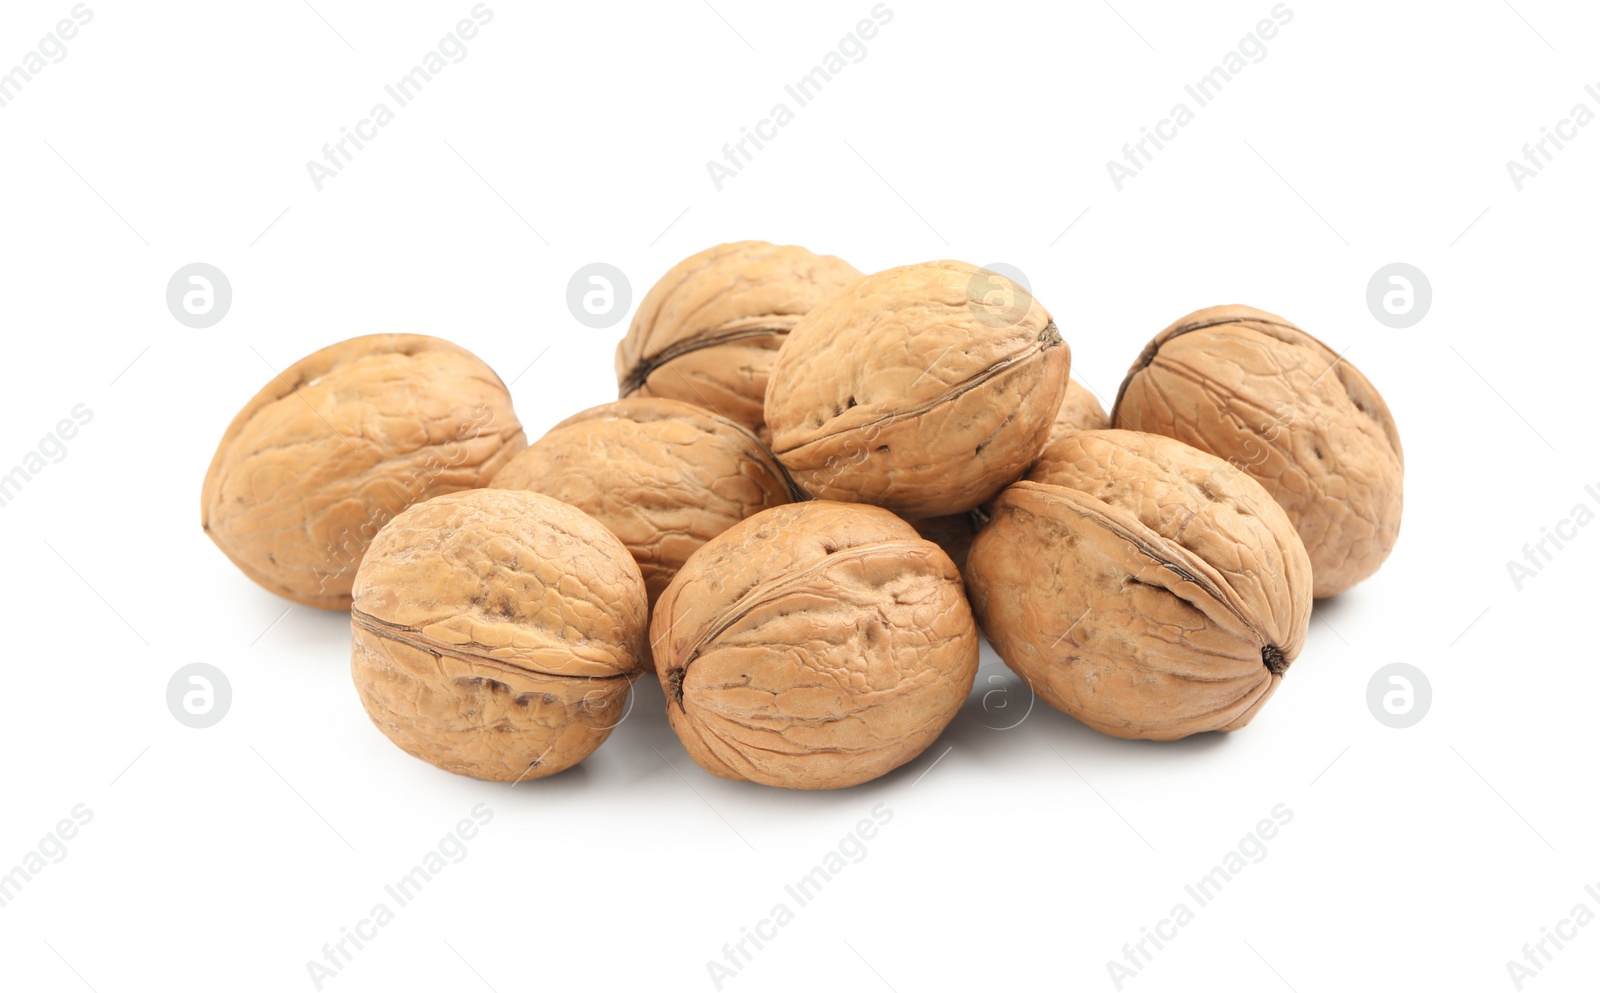 Photo of Whole walnuts in shell on white background